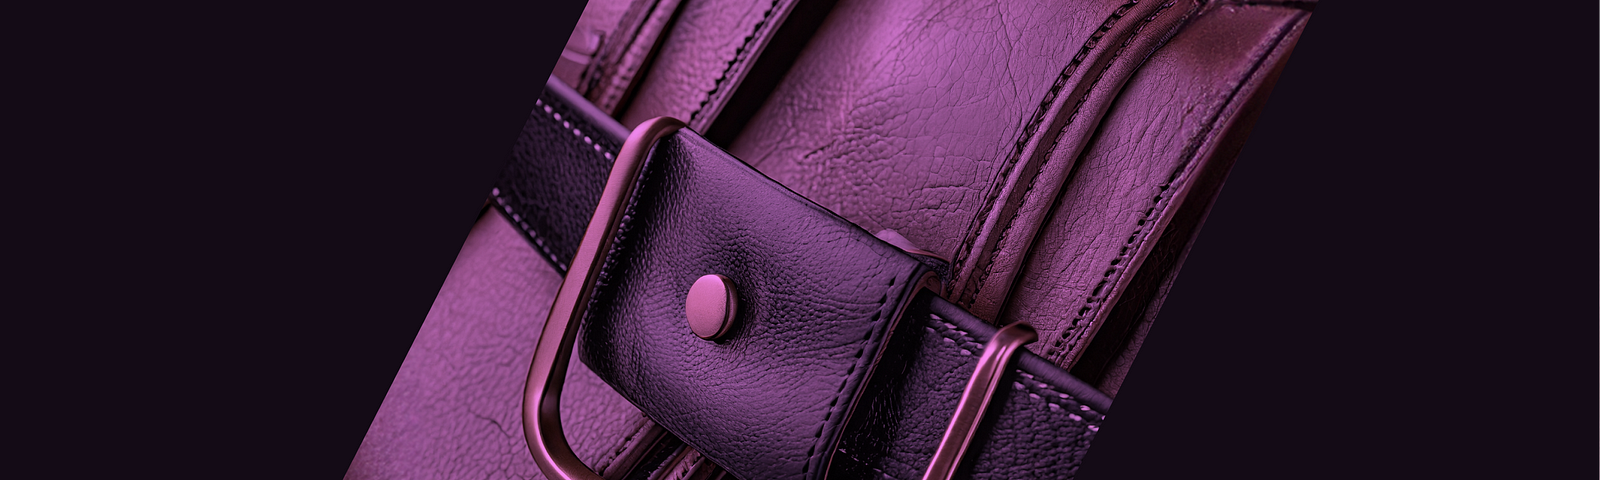 Close-up view of a luxurious purple leather handbag with a detailed rose gold buckle, exemplifying the high-resolution 3D product imaging capabilities by Designhubz for a sophisticated online retail experience.